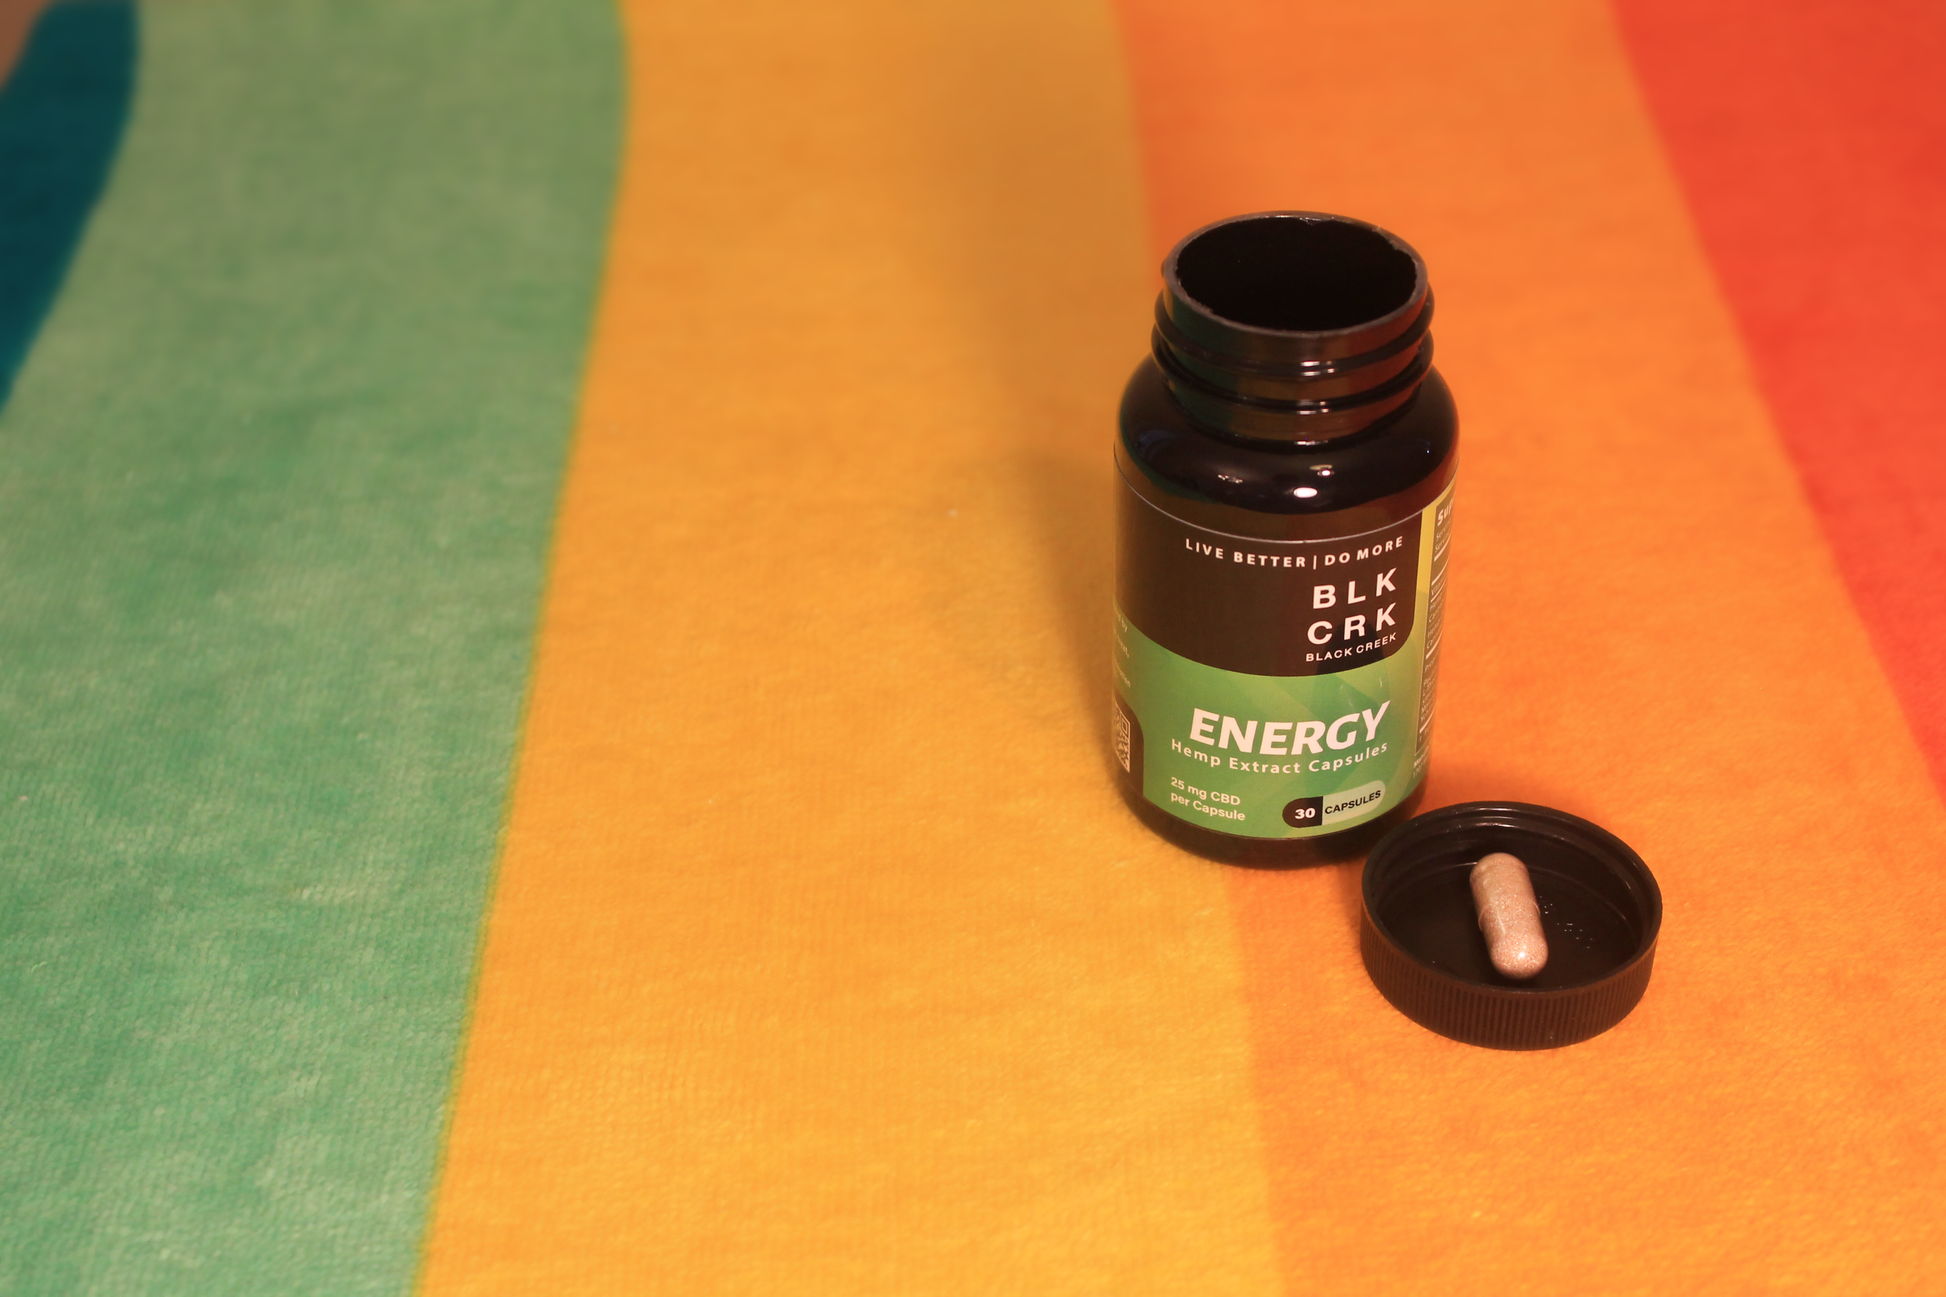 The Black Creek CBD Energy Capsules atop a colorful beach towel with one capsule sitting in the bottle's black cap